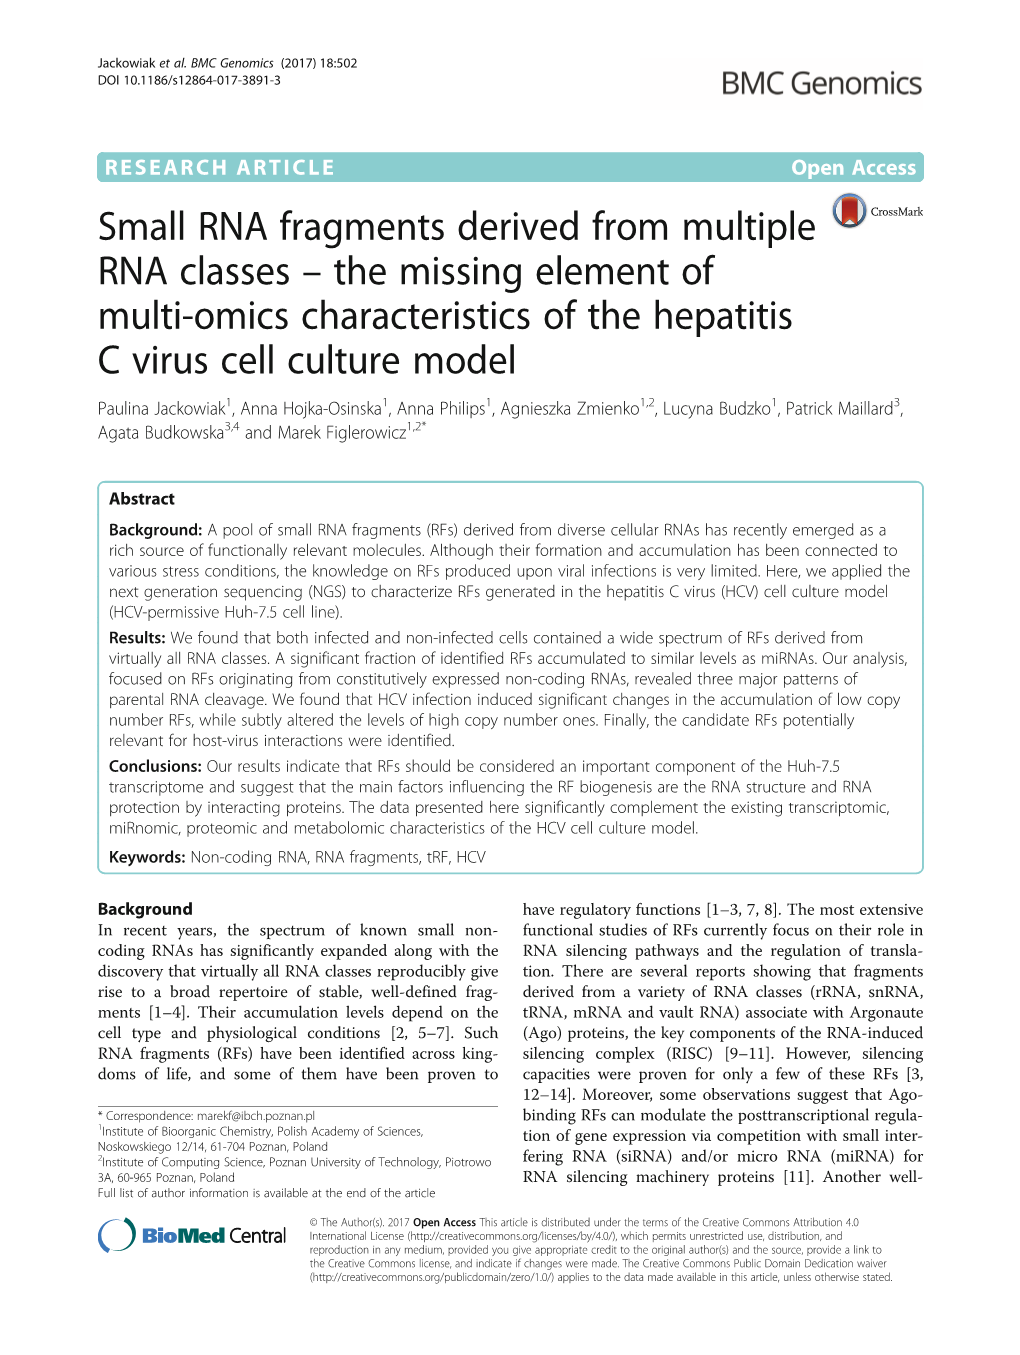 Small RNA Fragments Derived from Multiple RNA Classes – the Missing